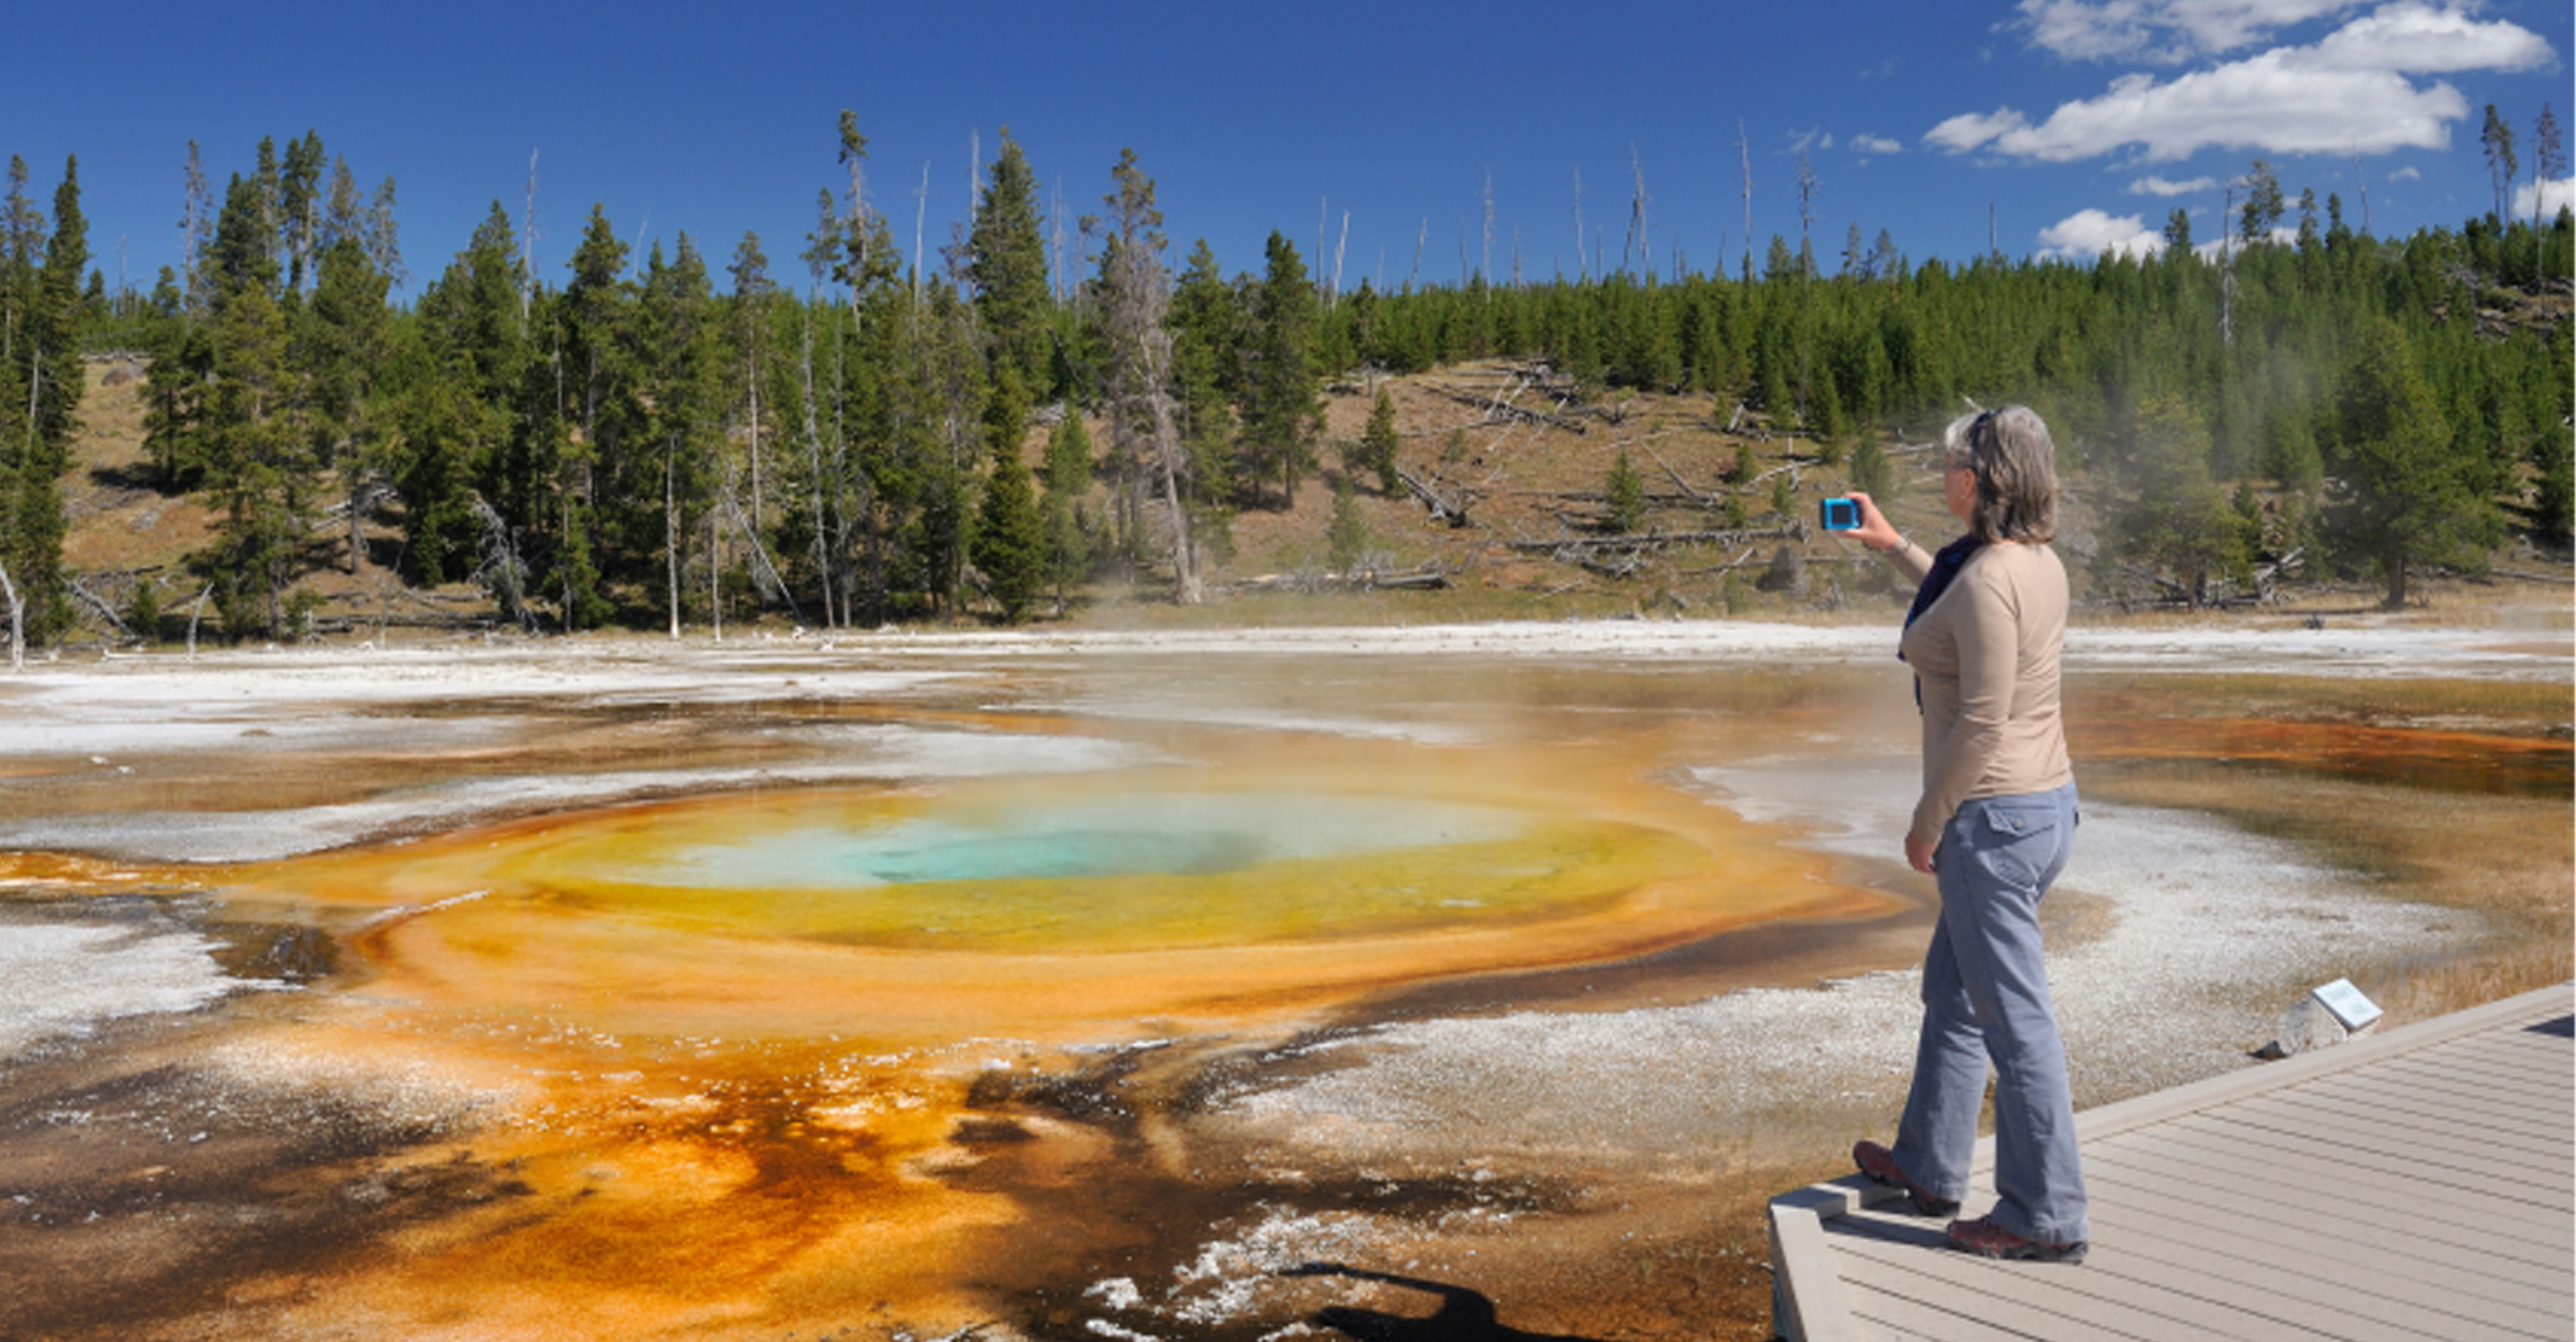 Traveler photographs a hot spring in Yellowstone National Park, United States